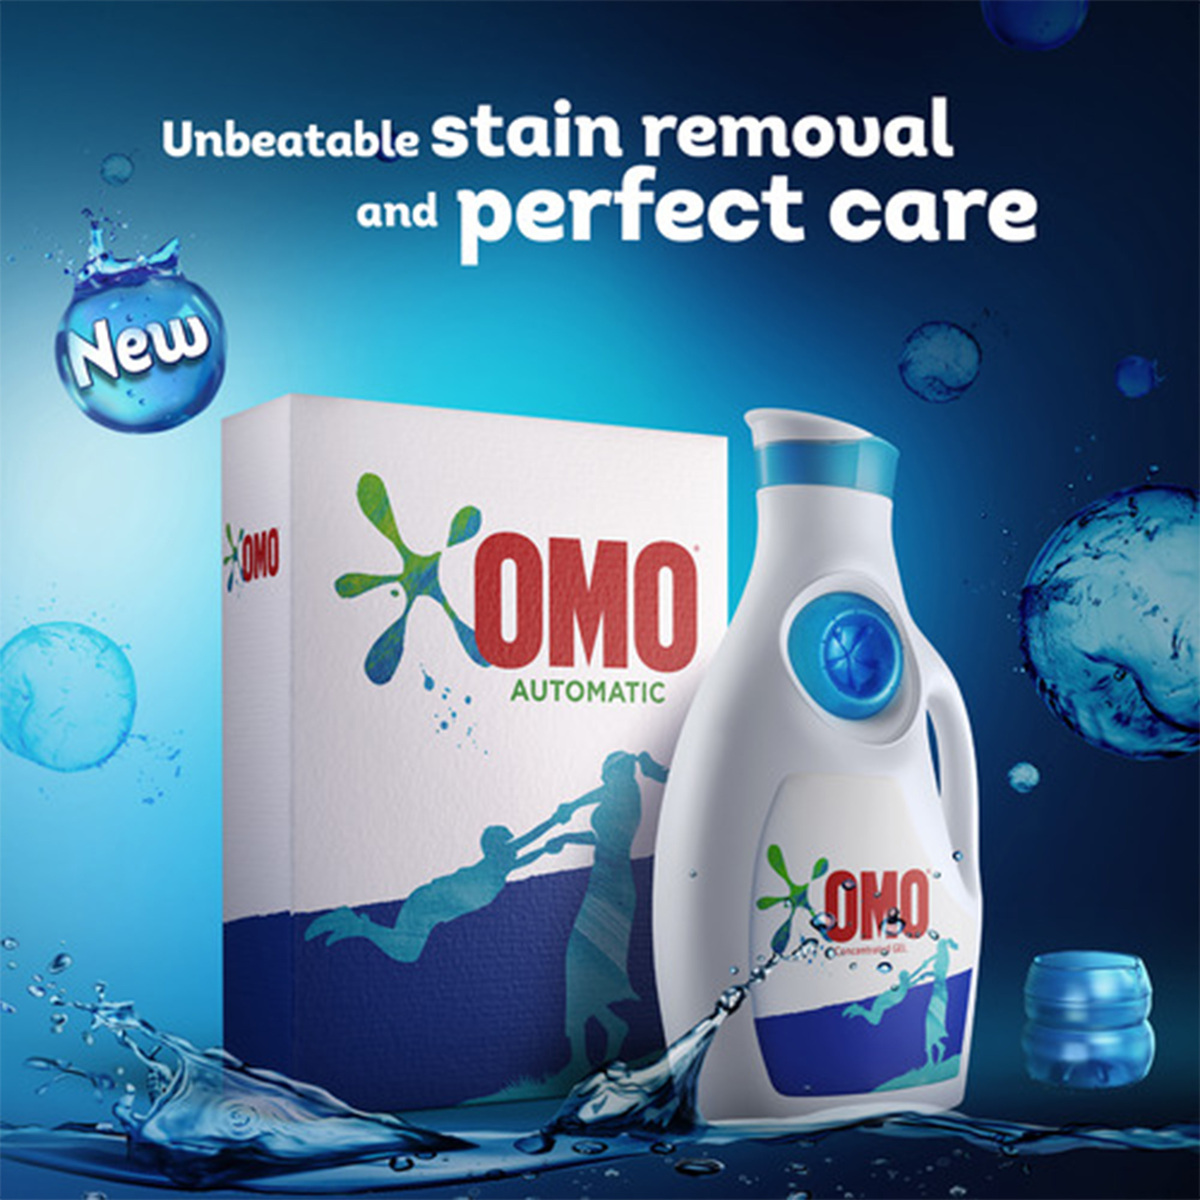 OMO Top Load Laundry Detergent Powder with Comfort 6kg